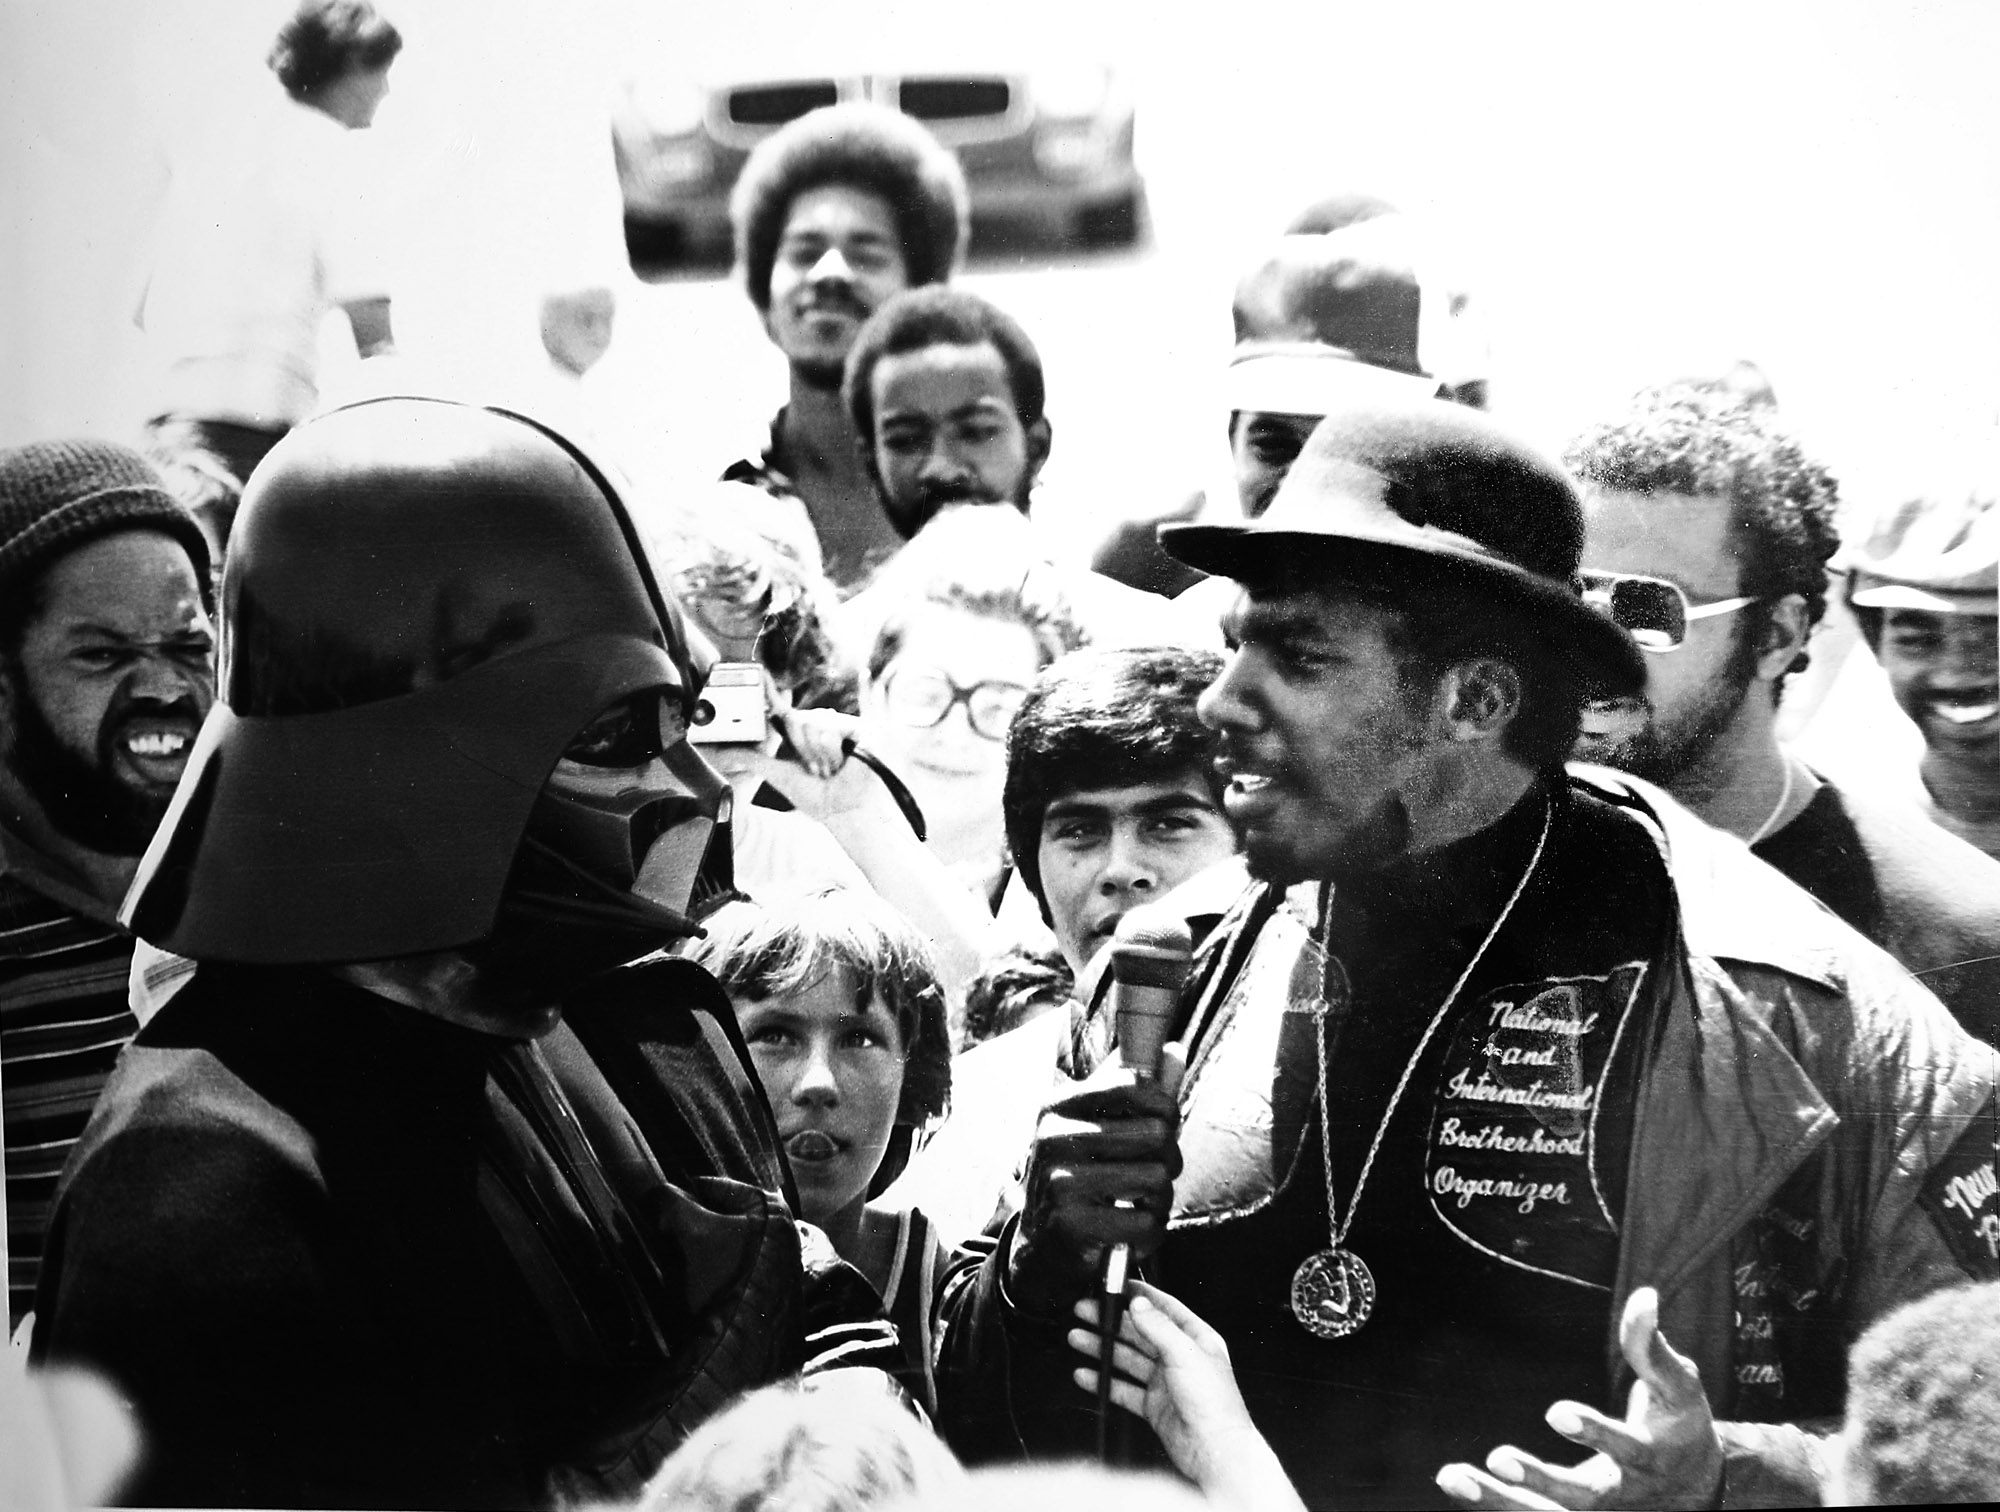 Willie with Darth Vader